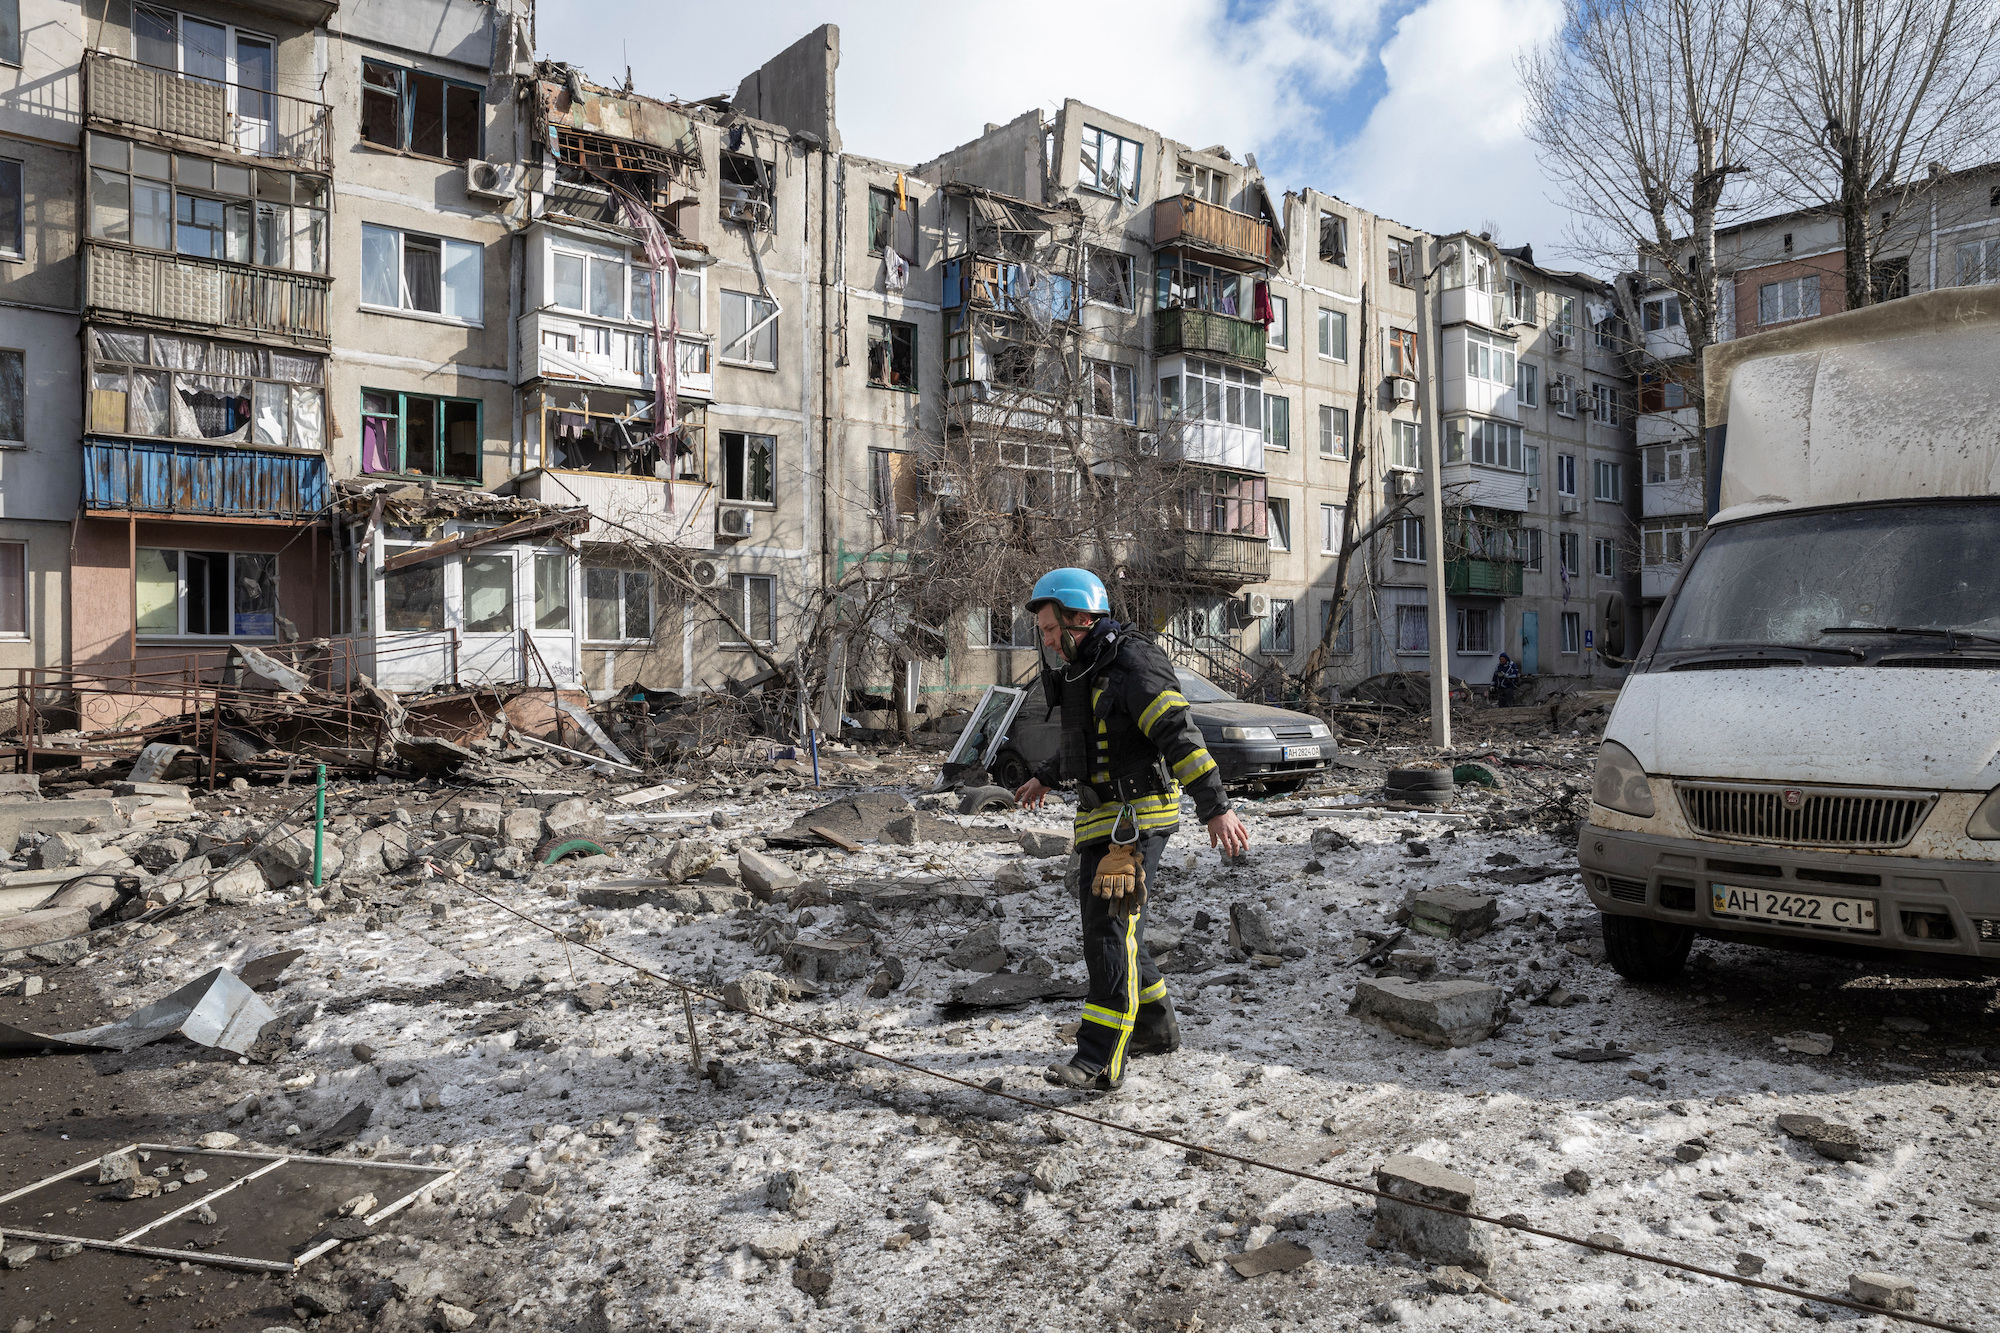 Death toll rises to 3 after Russian attack on apartments in Pokrovsk, Ukrainian authorities say